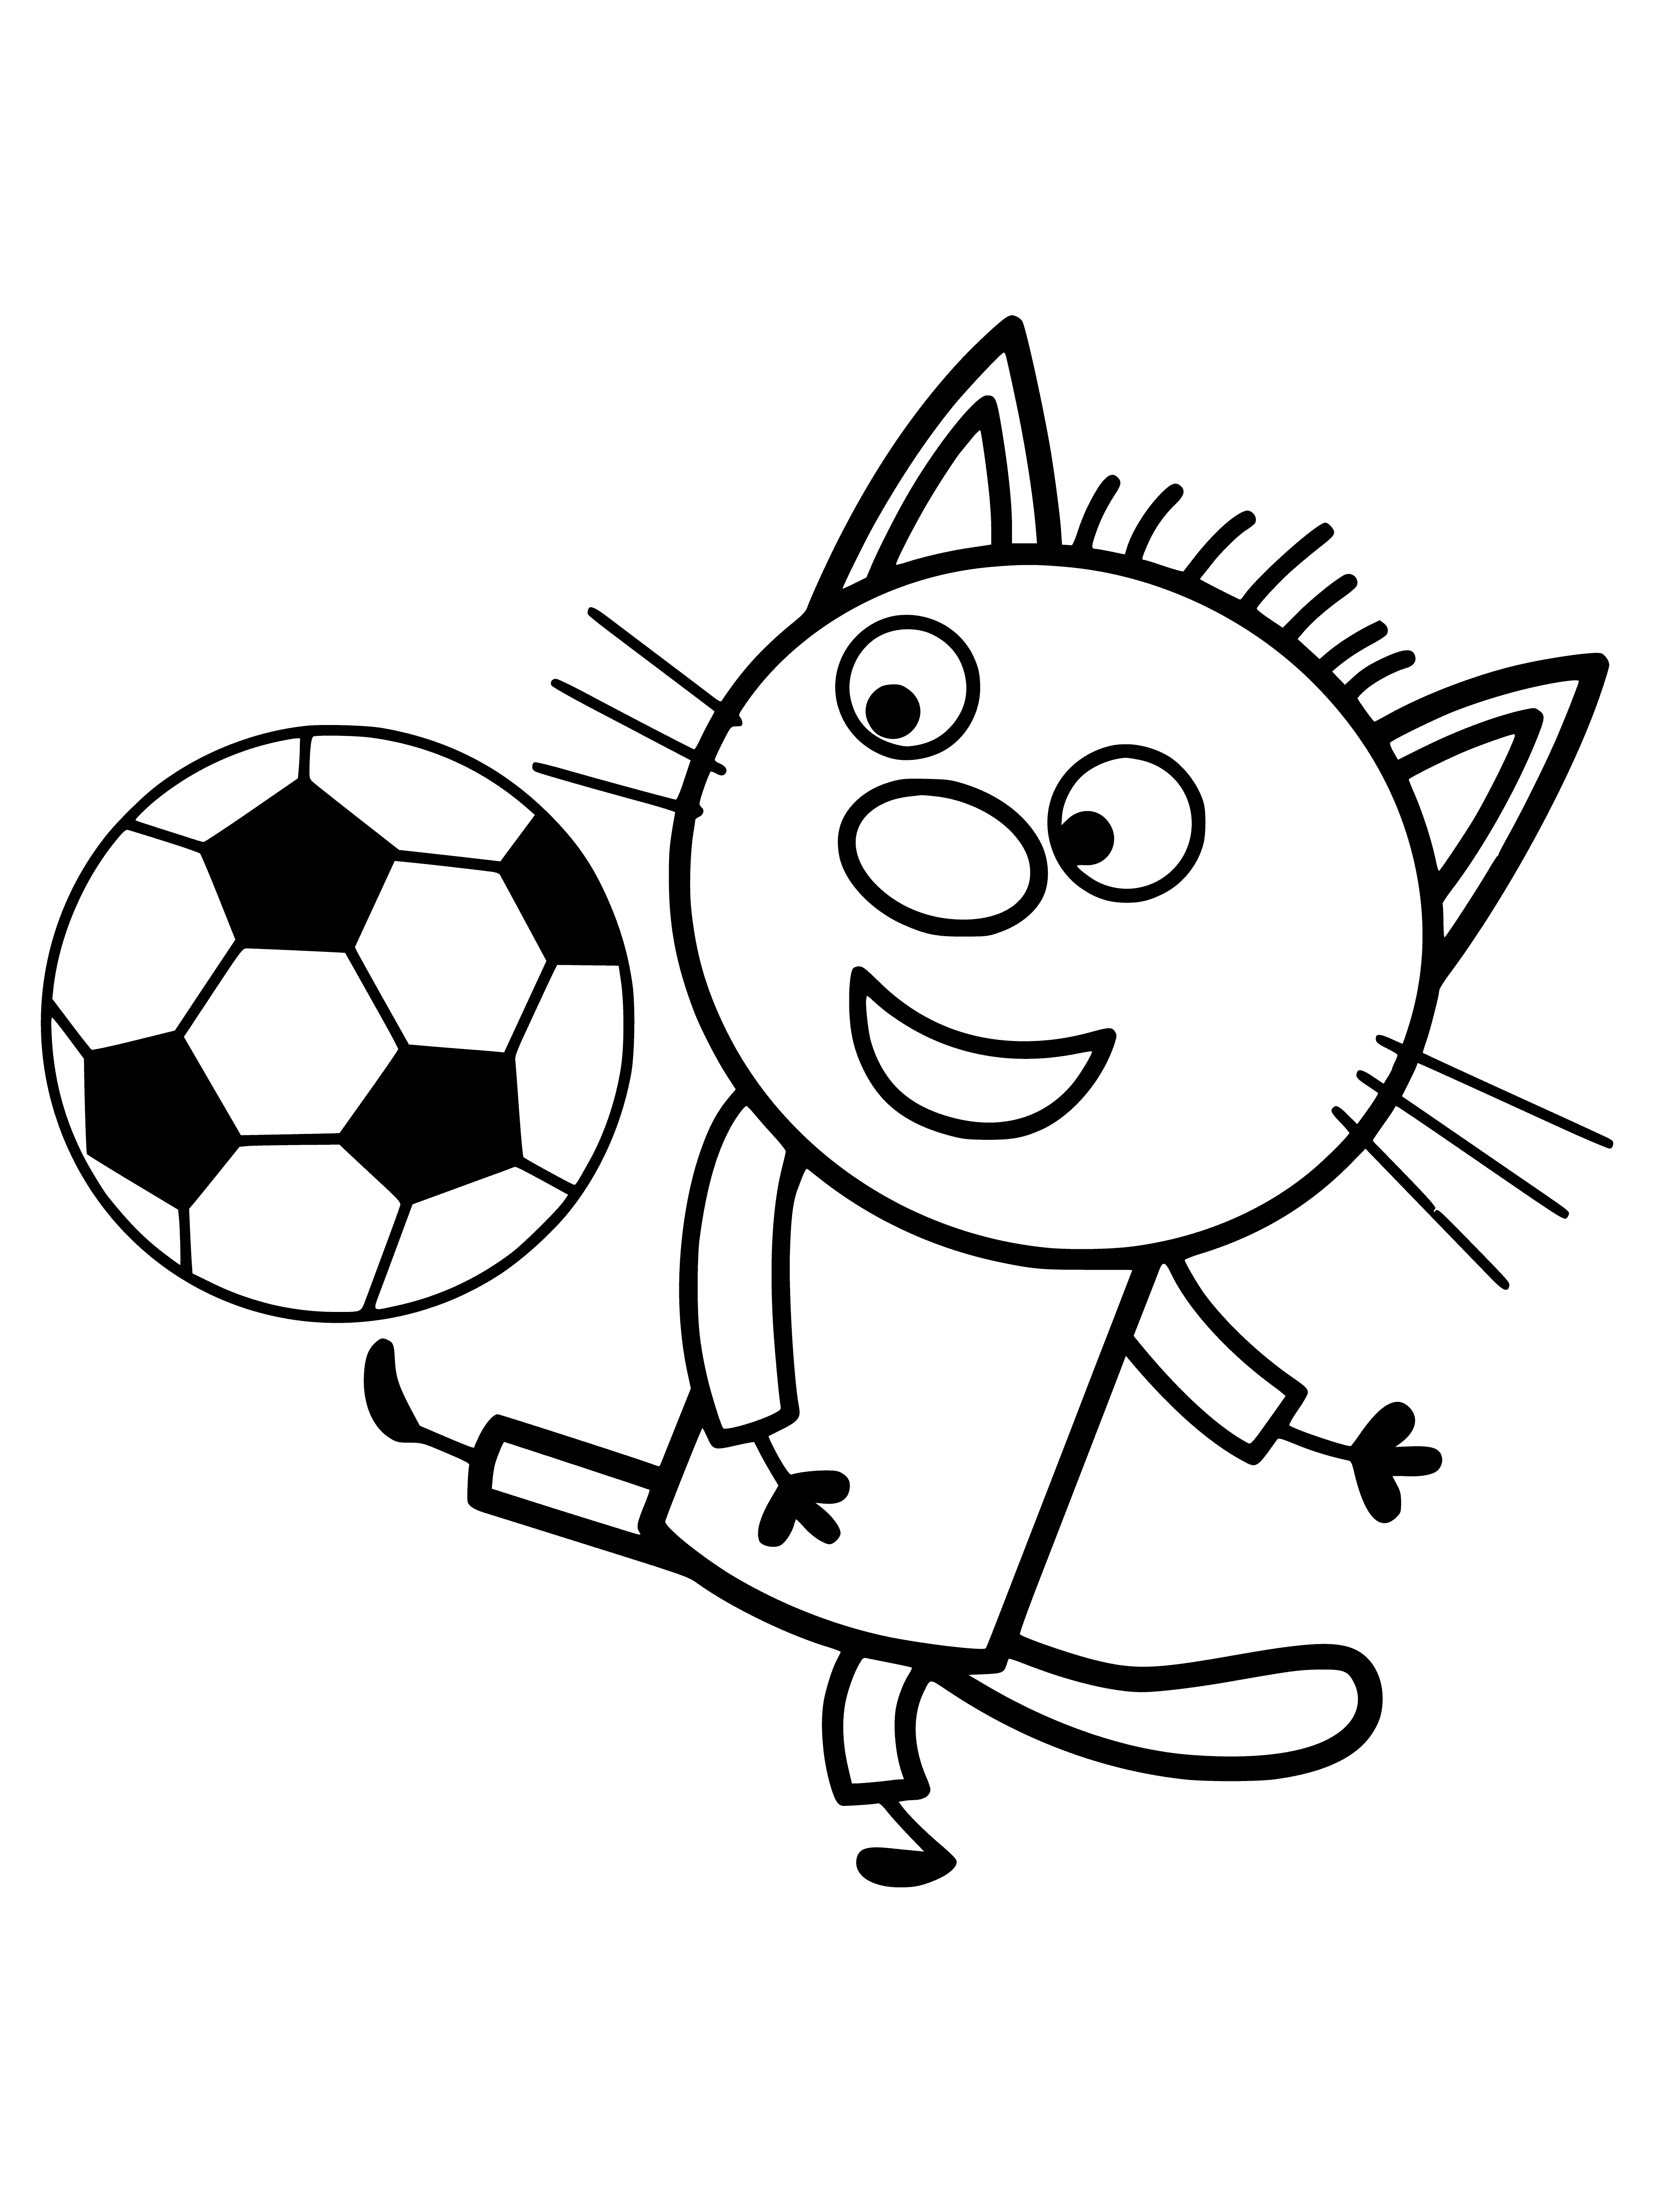 coloring page: Three cats playing together: black & white w/ soccer ball, one all black, one all white.